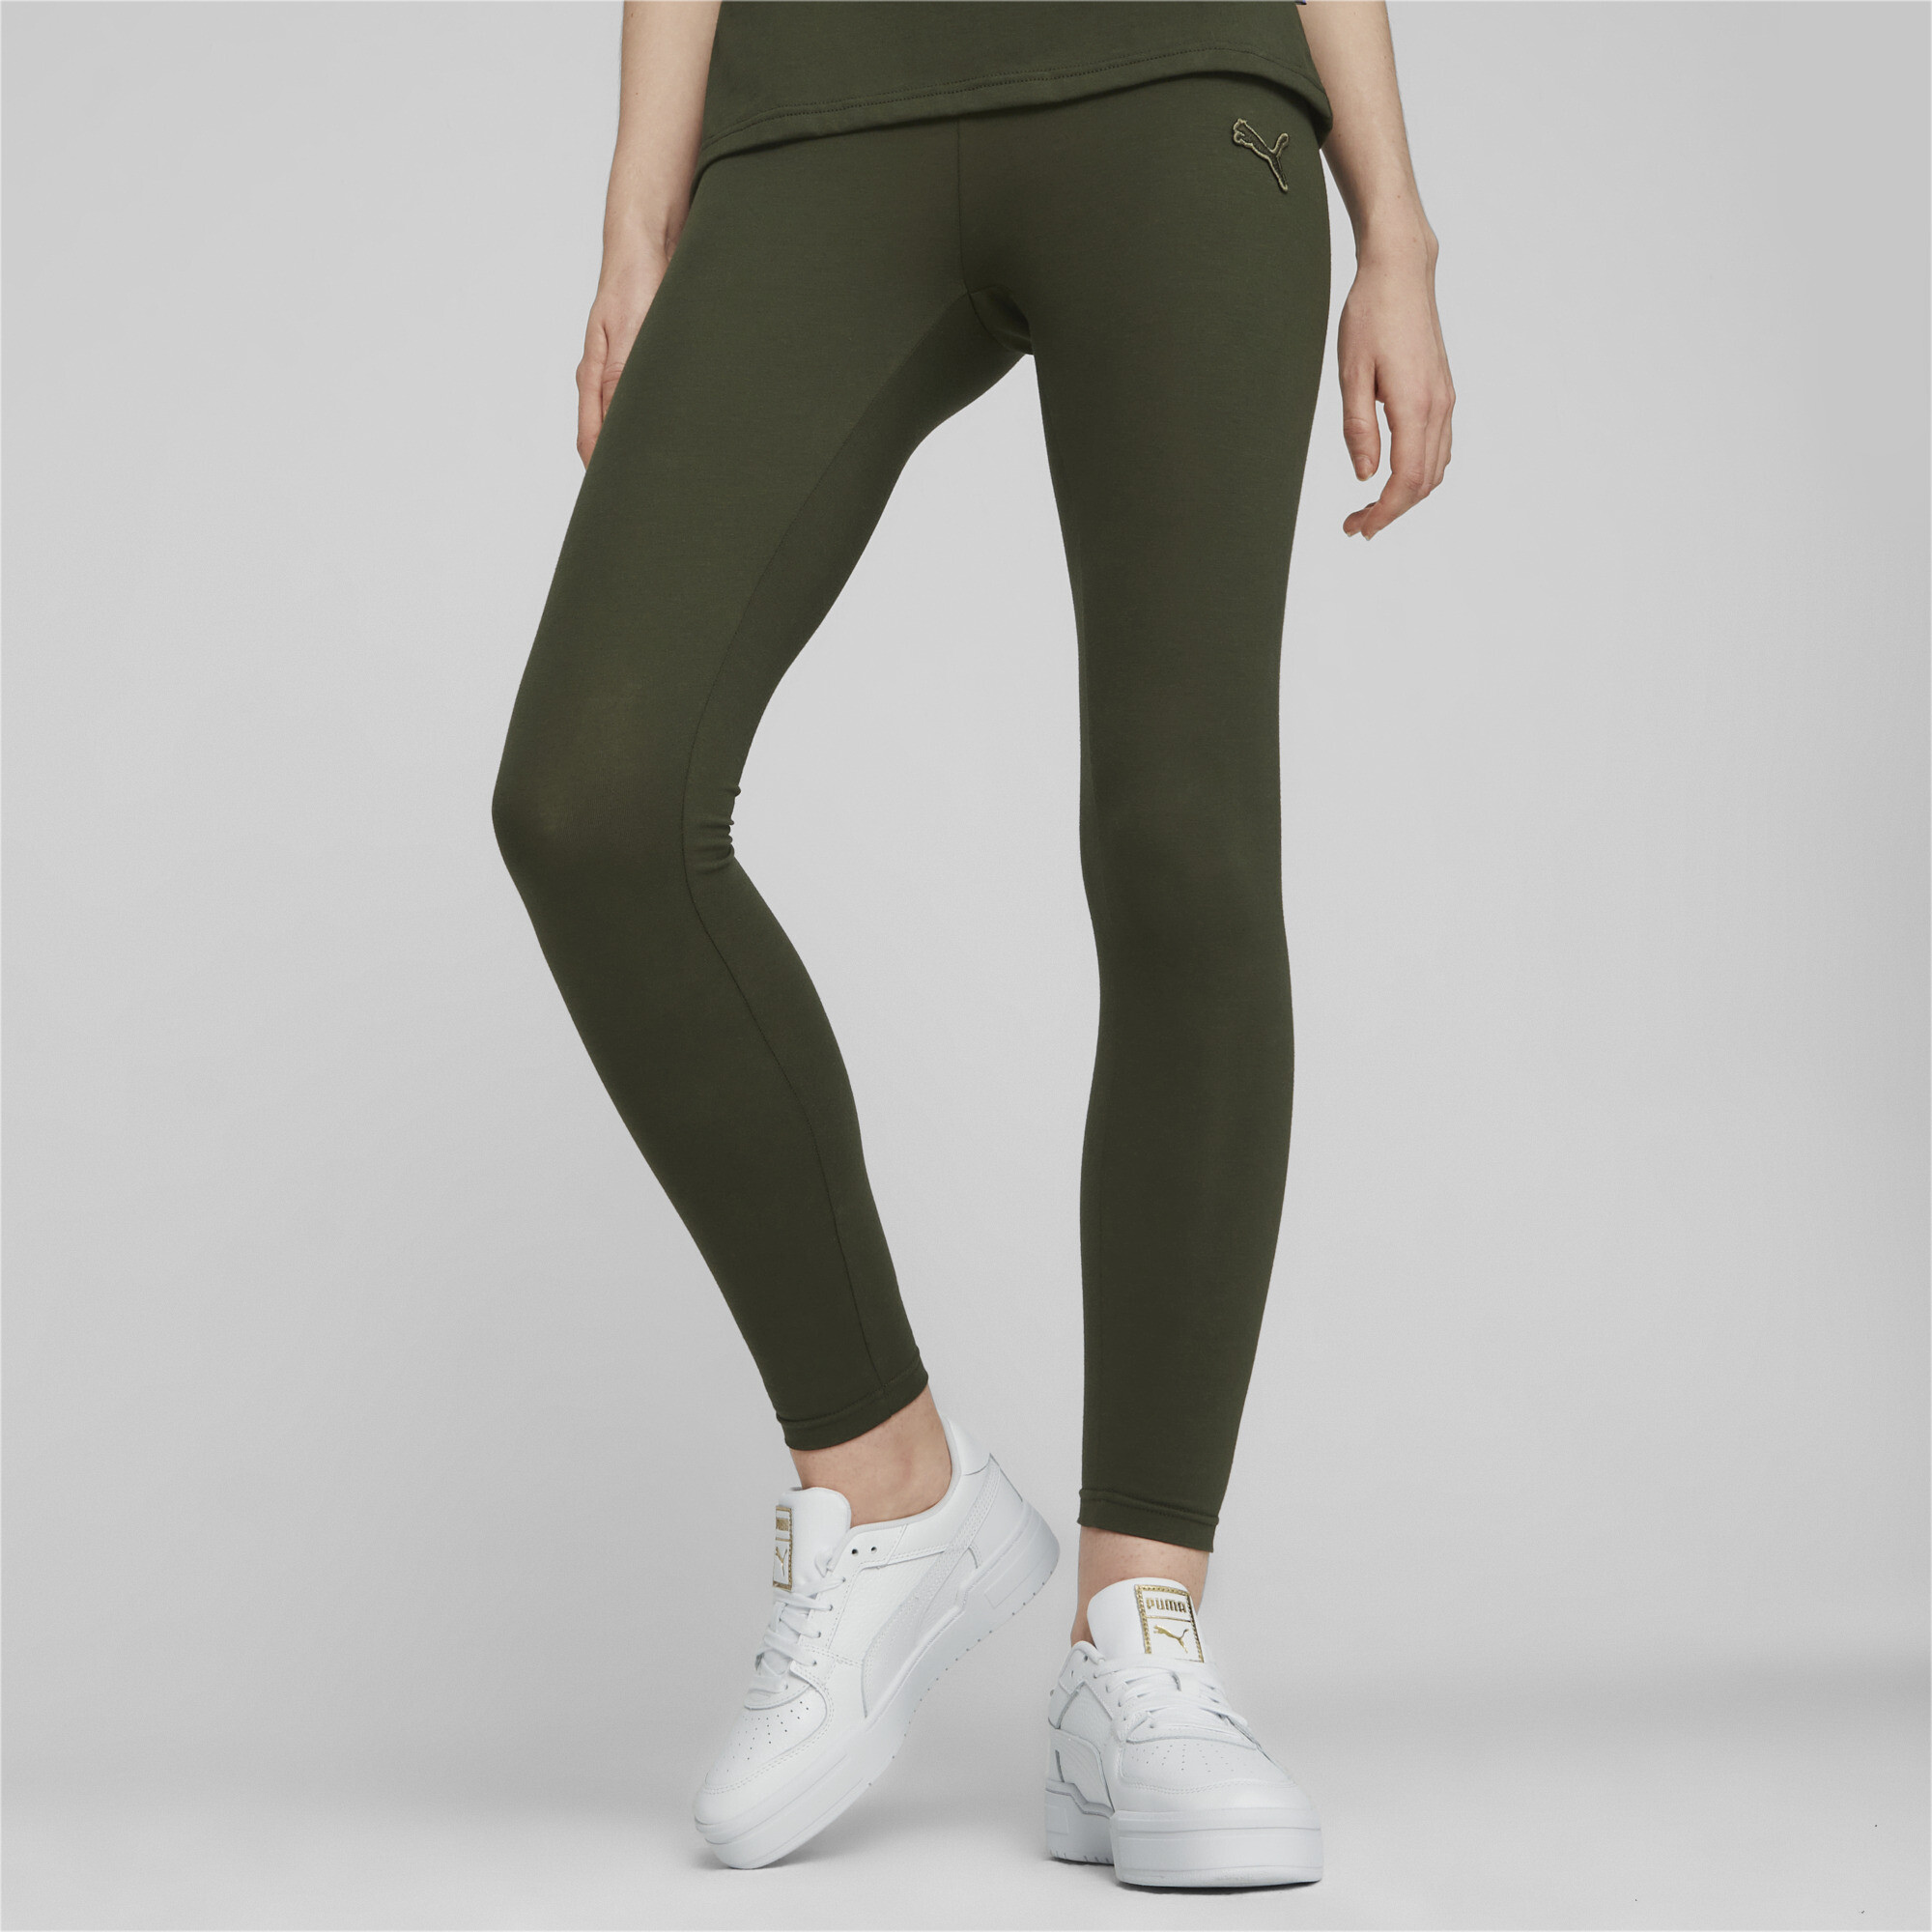 Women's Puma Made In France Leggings, Green, Size XXL, Clothing